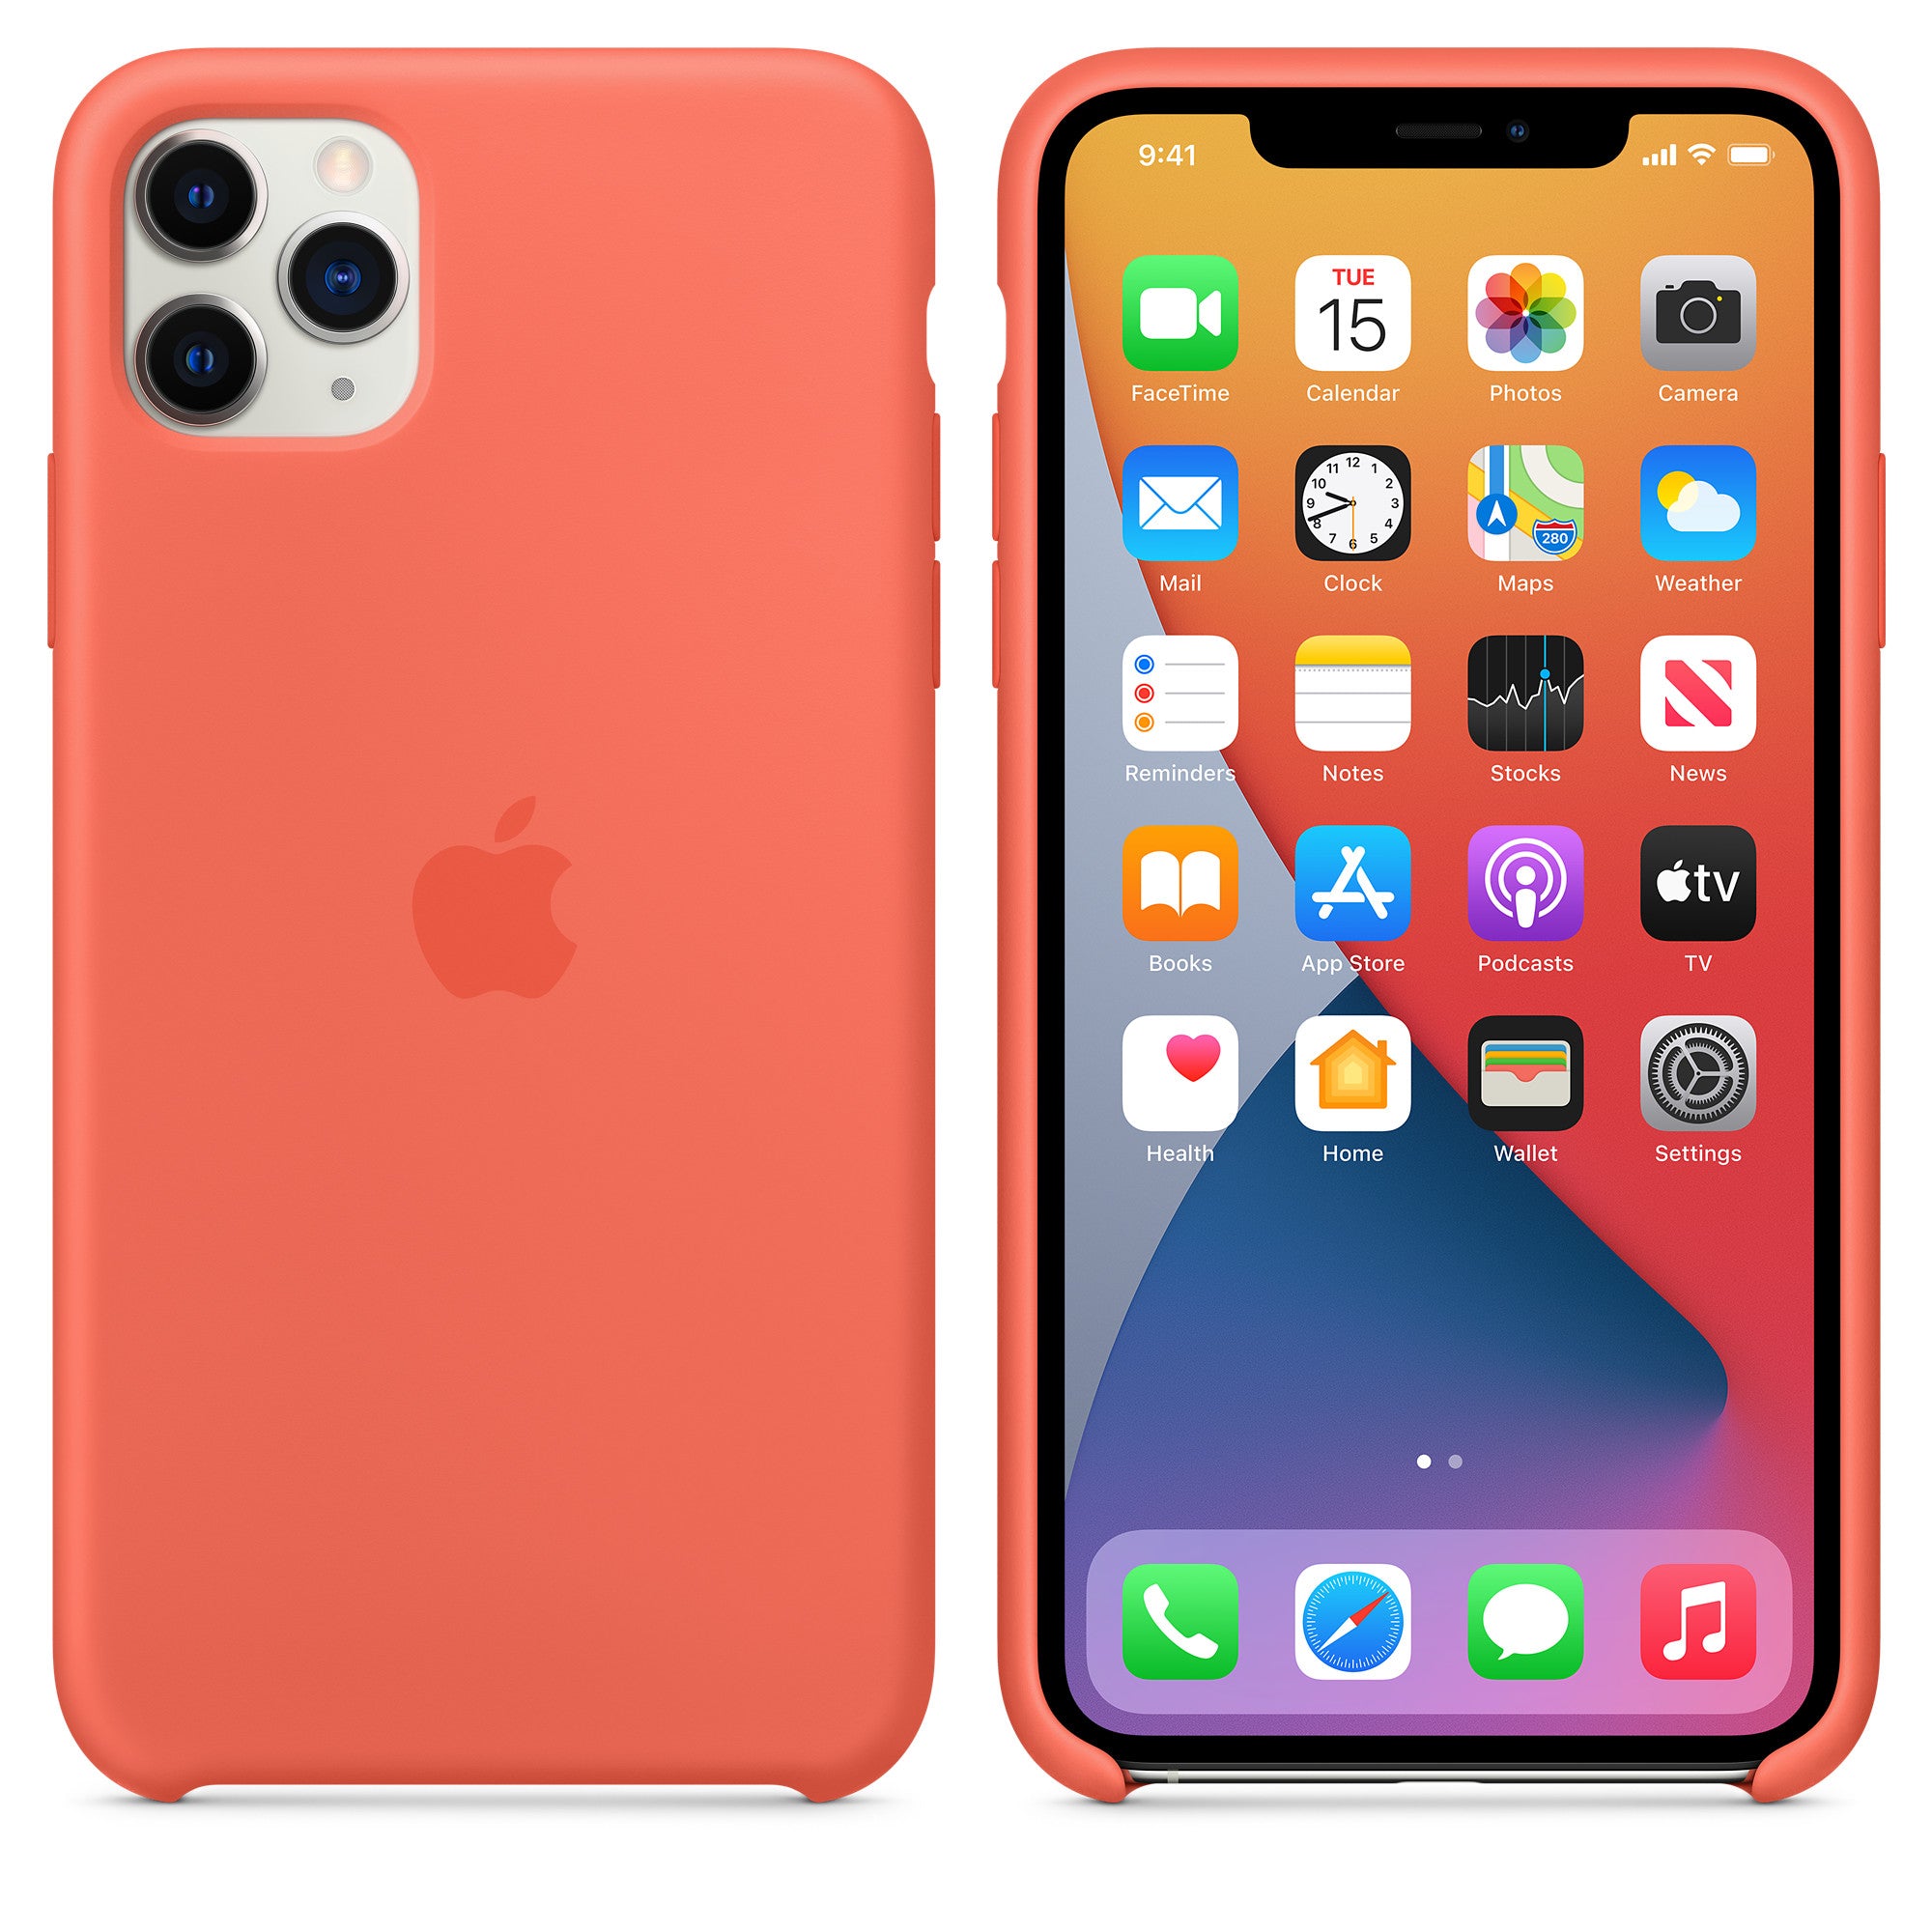 Apple iPhone 11 Pro Max Silicone Case Clementine Clementine New - Sealed